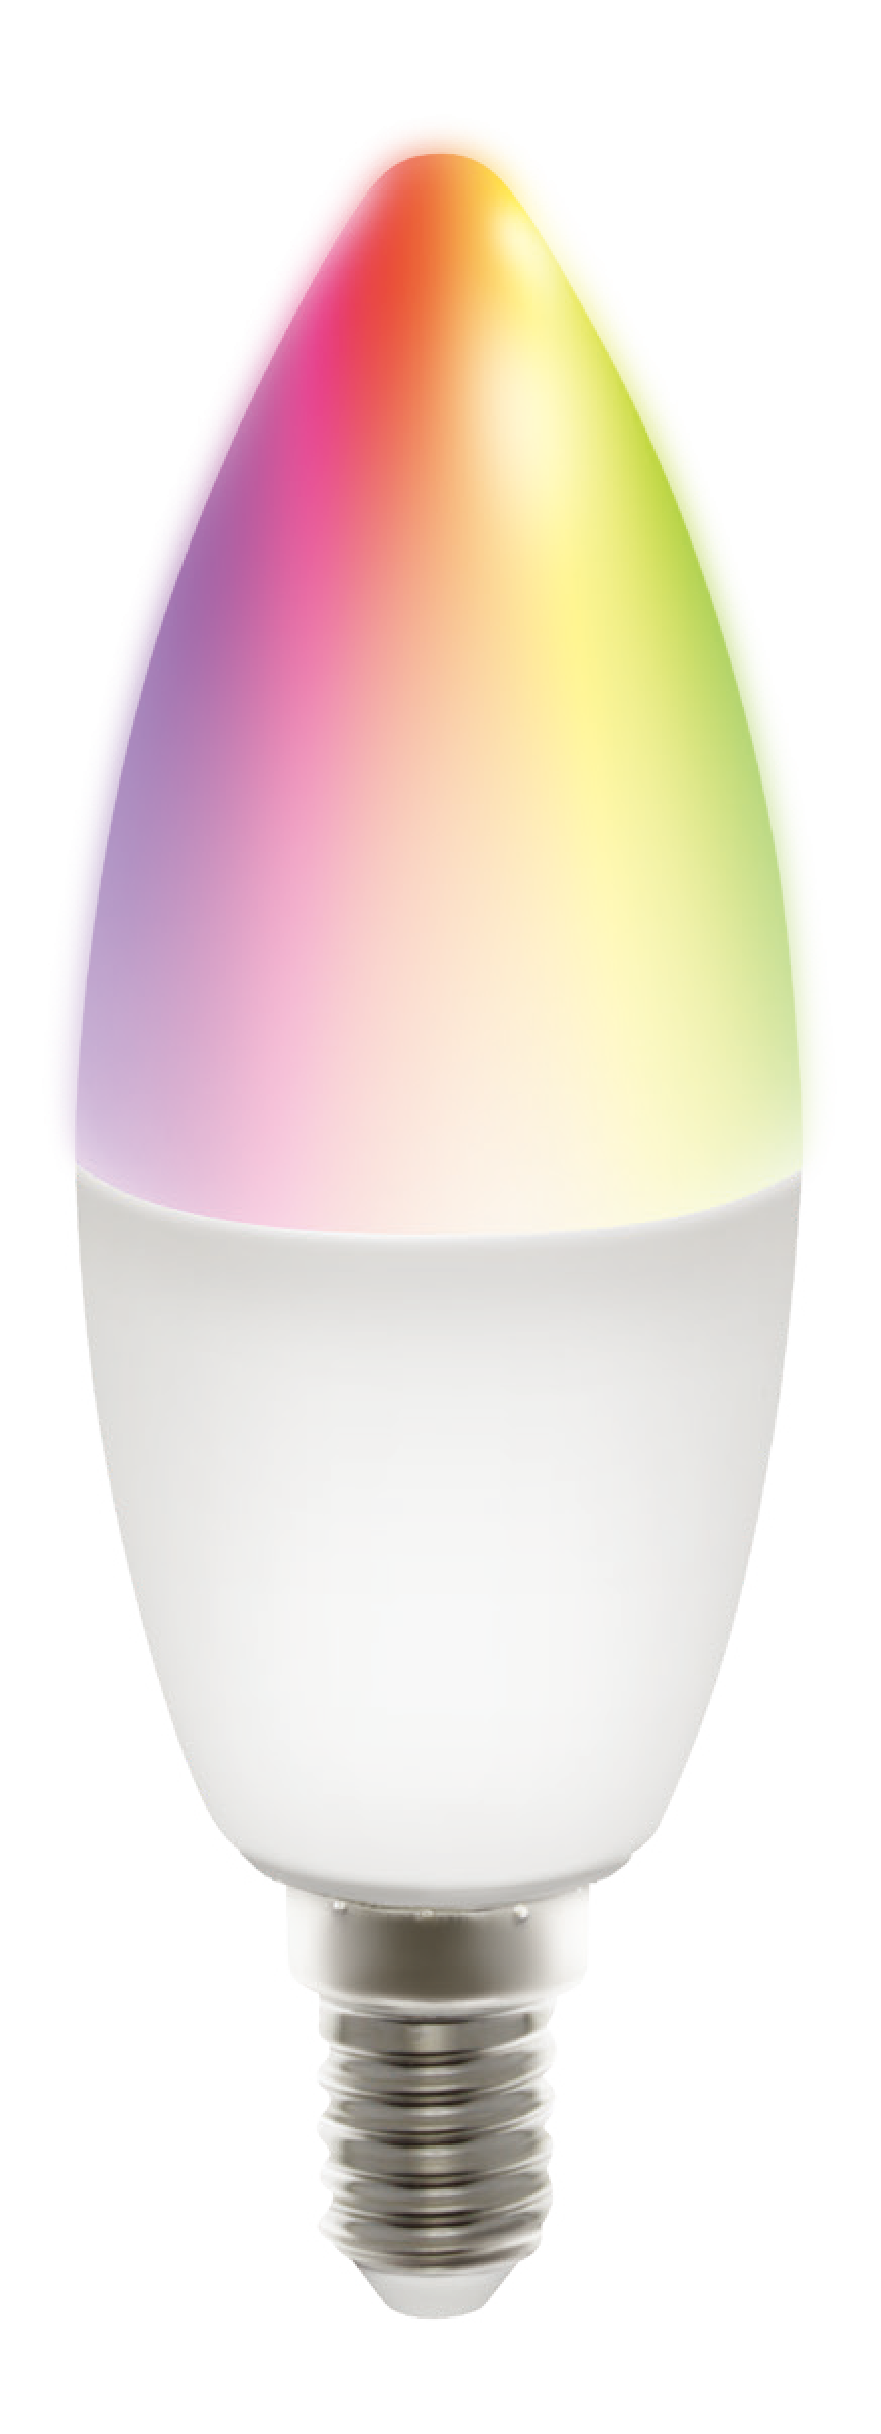 DELTACO SMART HOME LED lamp, E14, WiFI 2.4GHz, 5W, 470lm, dimmable, 2700K-6500K, 220-240V, RGB SH-LE14RGB